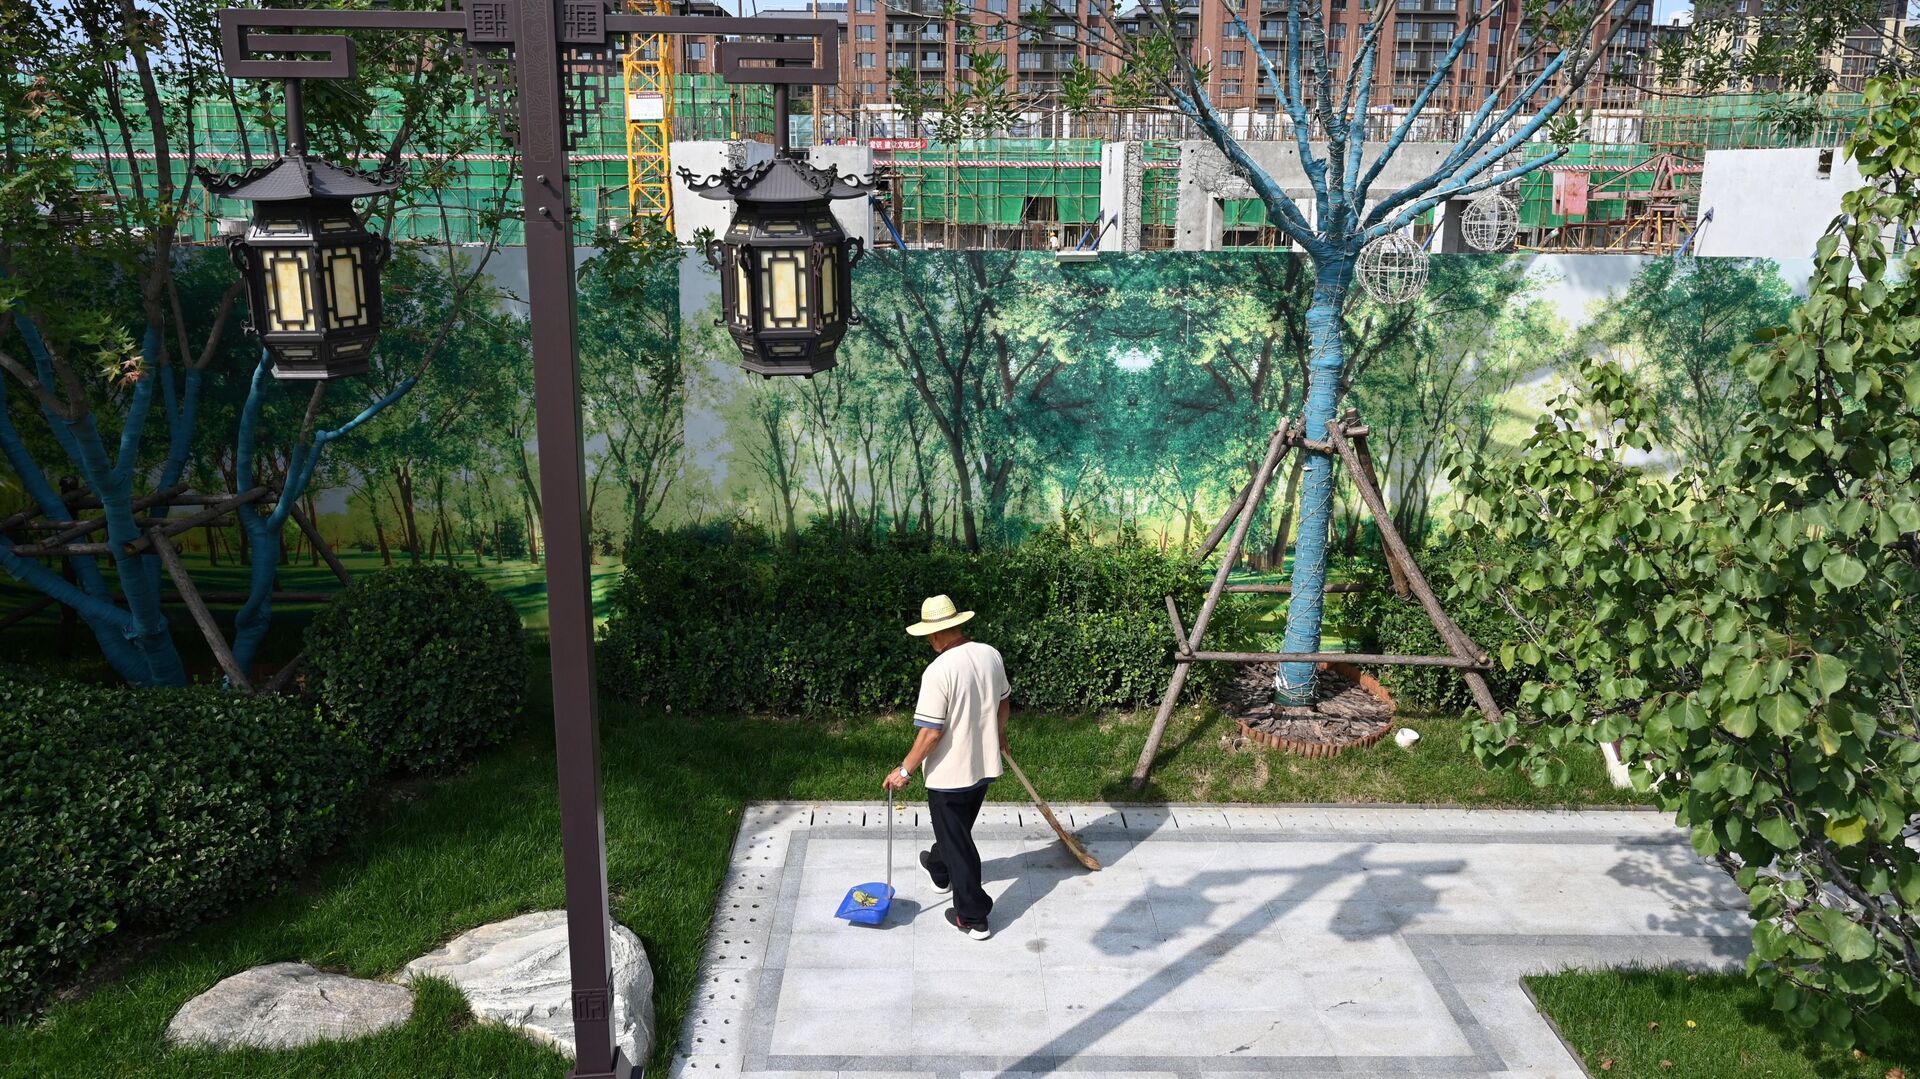 A worker cleans a display area next to the construction site of an Evergrande housing complex in Beijing on September 13, 2021 - 俄罗斯卫星通讯社, 1920, 08.10.2021